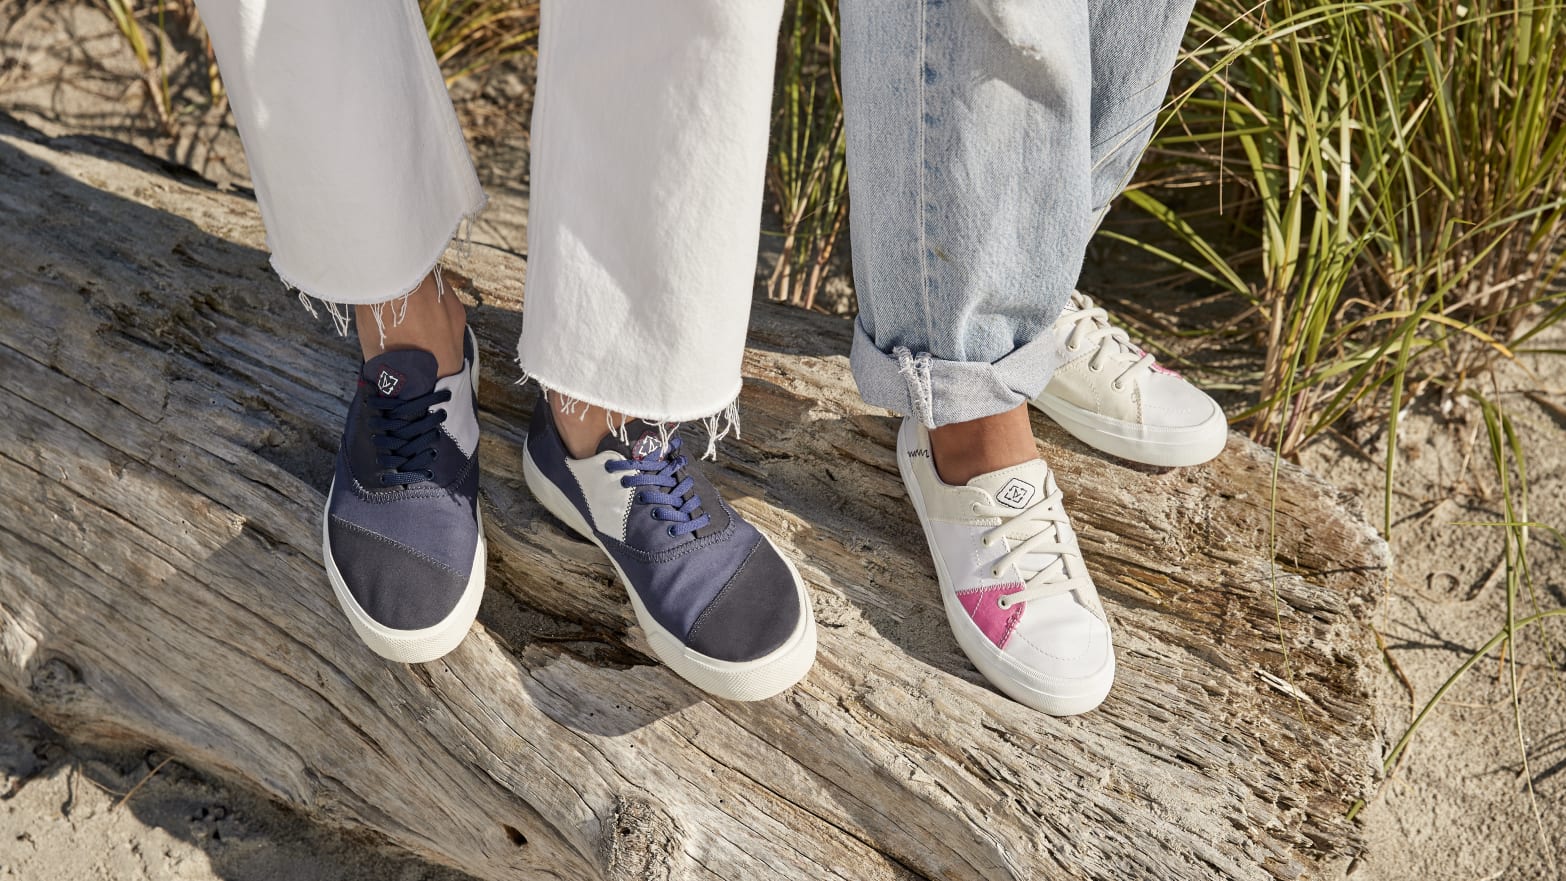 Sperry Creates Sustainable Shoe Line Made From Yarn Spun ...